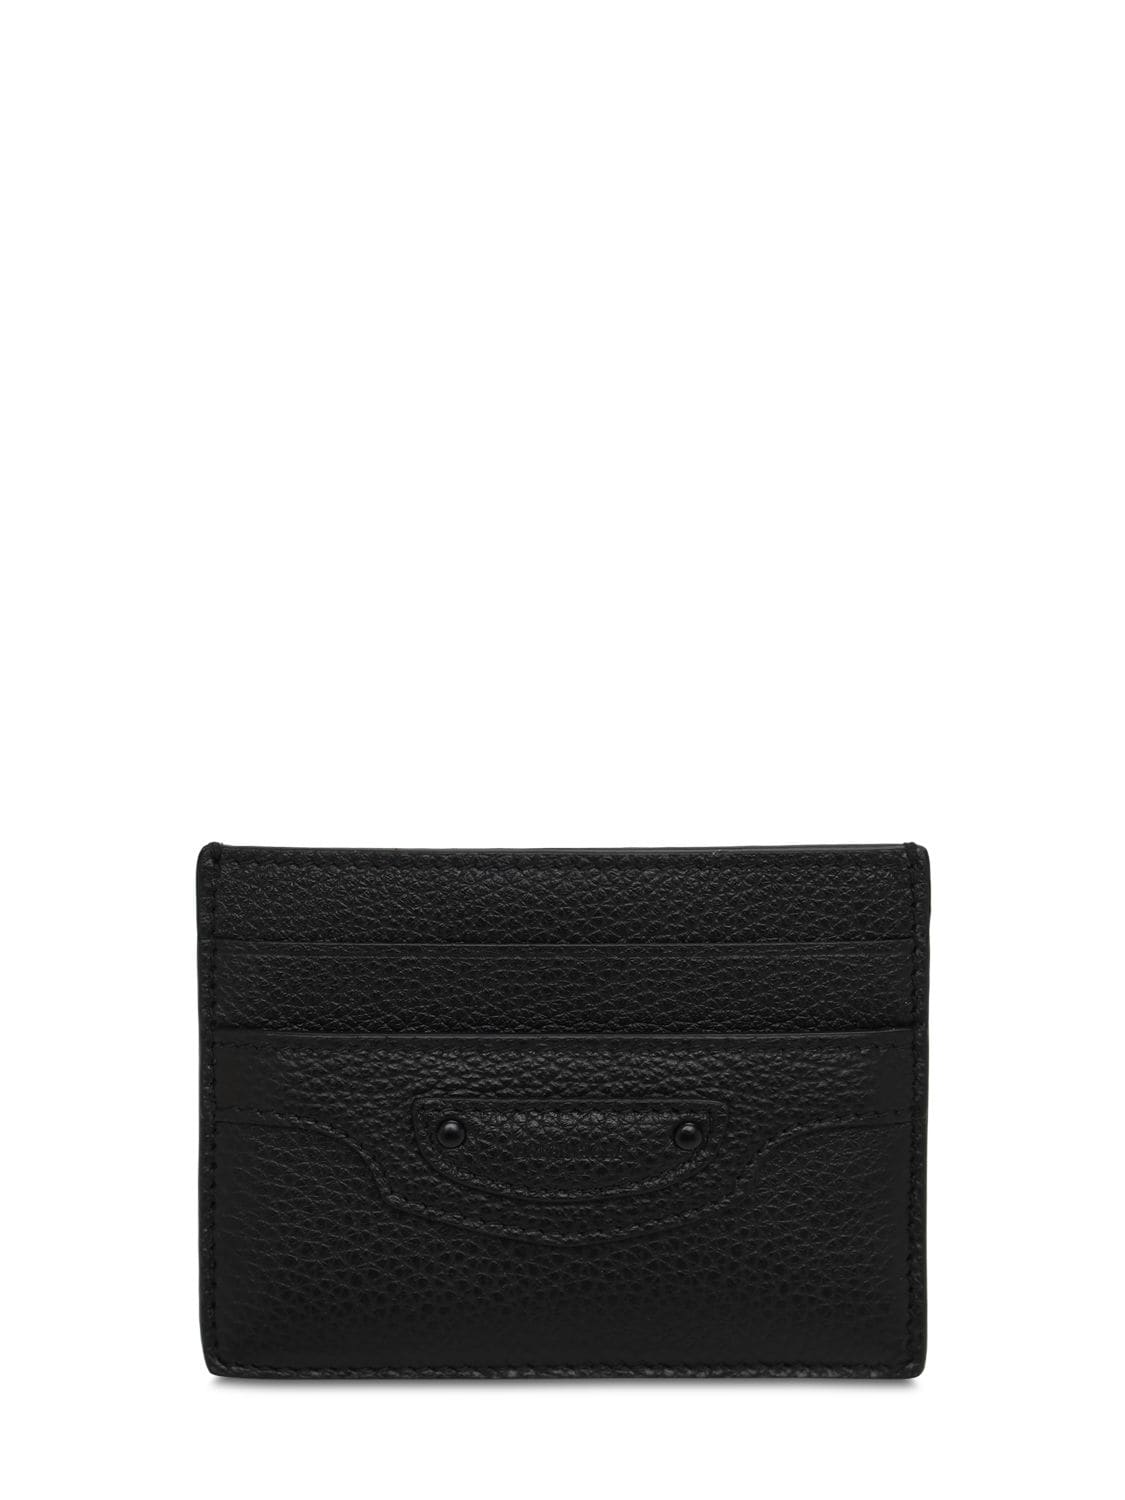 Neo Classic City Leather Card Holder